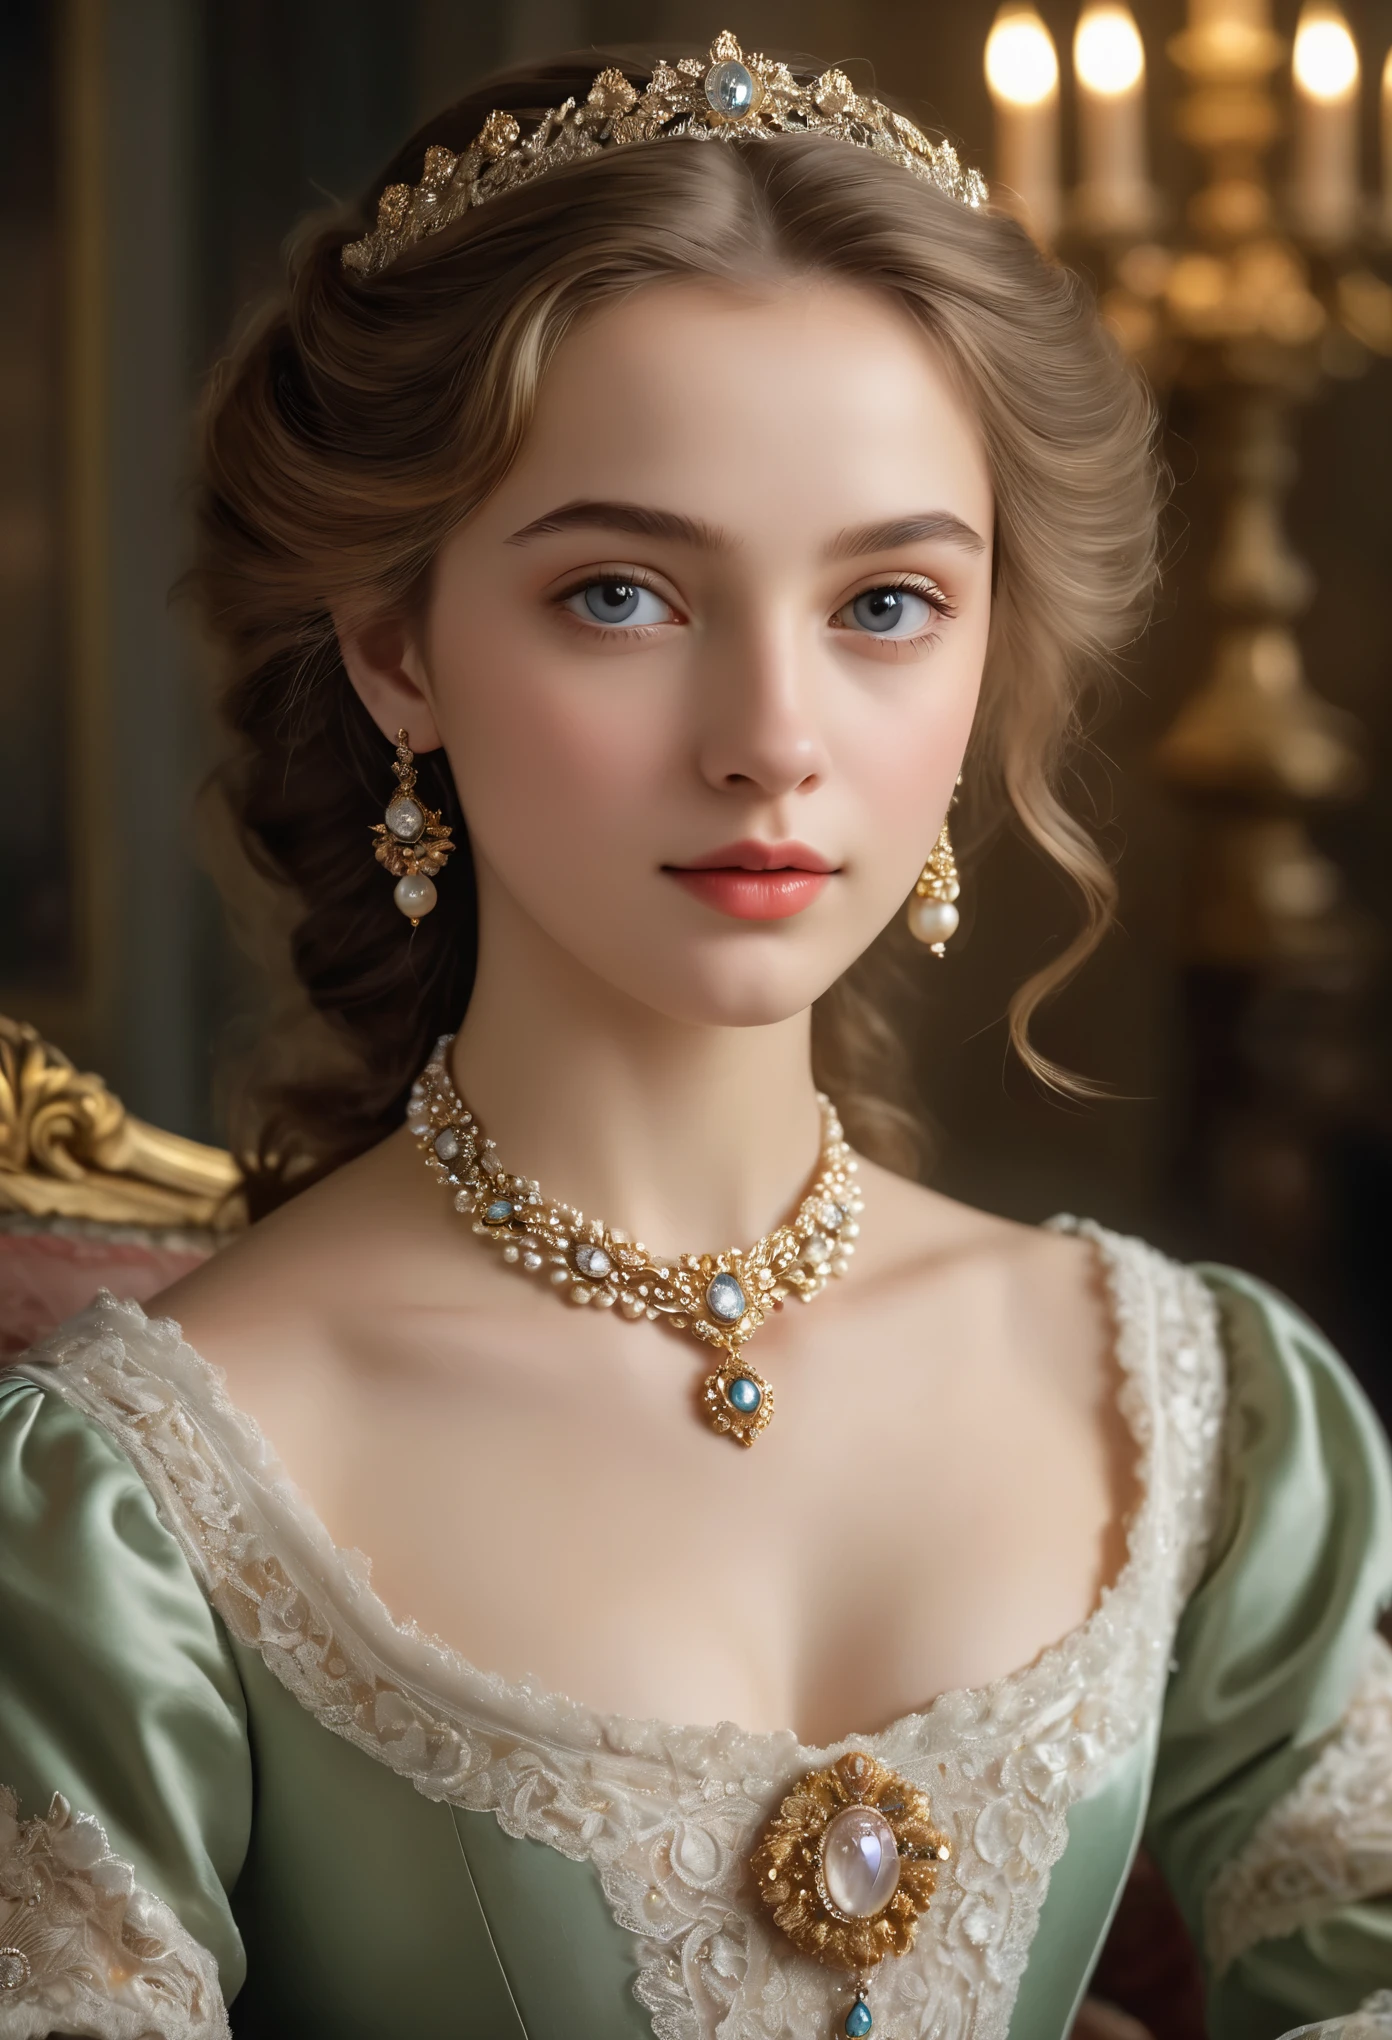 (best quality,4k,8k,highres,masterpiece:1.2),ultra-detailed,(realistic,photorealistic,photo-realistic:1.37),portrait,painting,pastels,personalized masterpiece,18th century,Russian,aristocratic,girl,noble daughter,14 years old,extremely beautiful,face,expressive eyes,delicate nose,luscious lips,porcelain skin,rosy cheeks,flowing curls,silky dress,stately posture,fine jewelry,embroidered lace collar,grand background,opulent interior,faint golden light